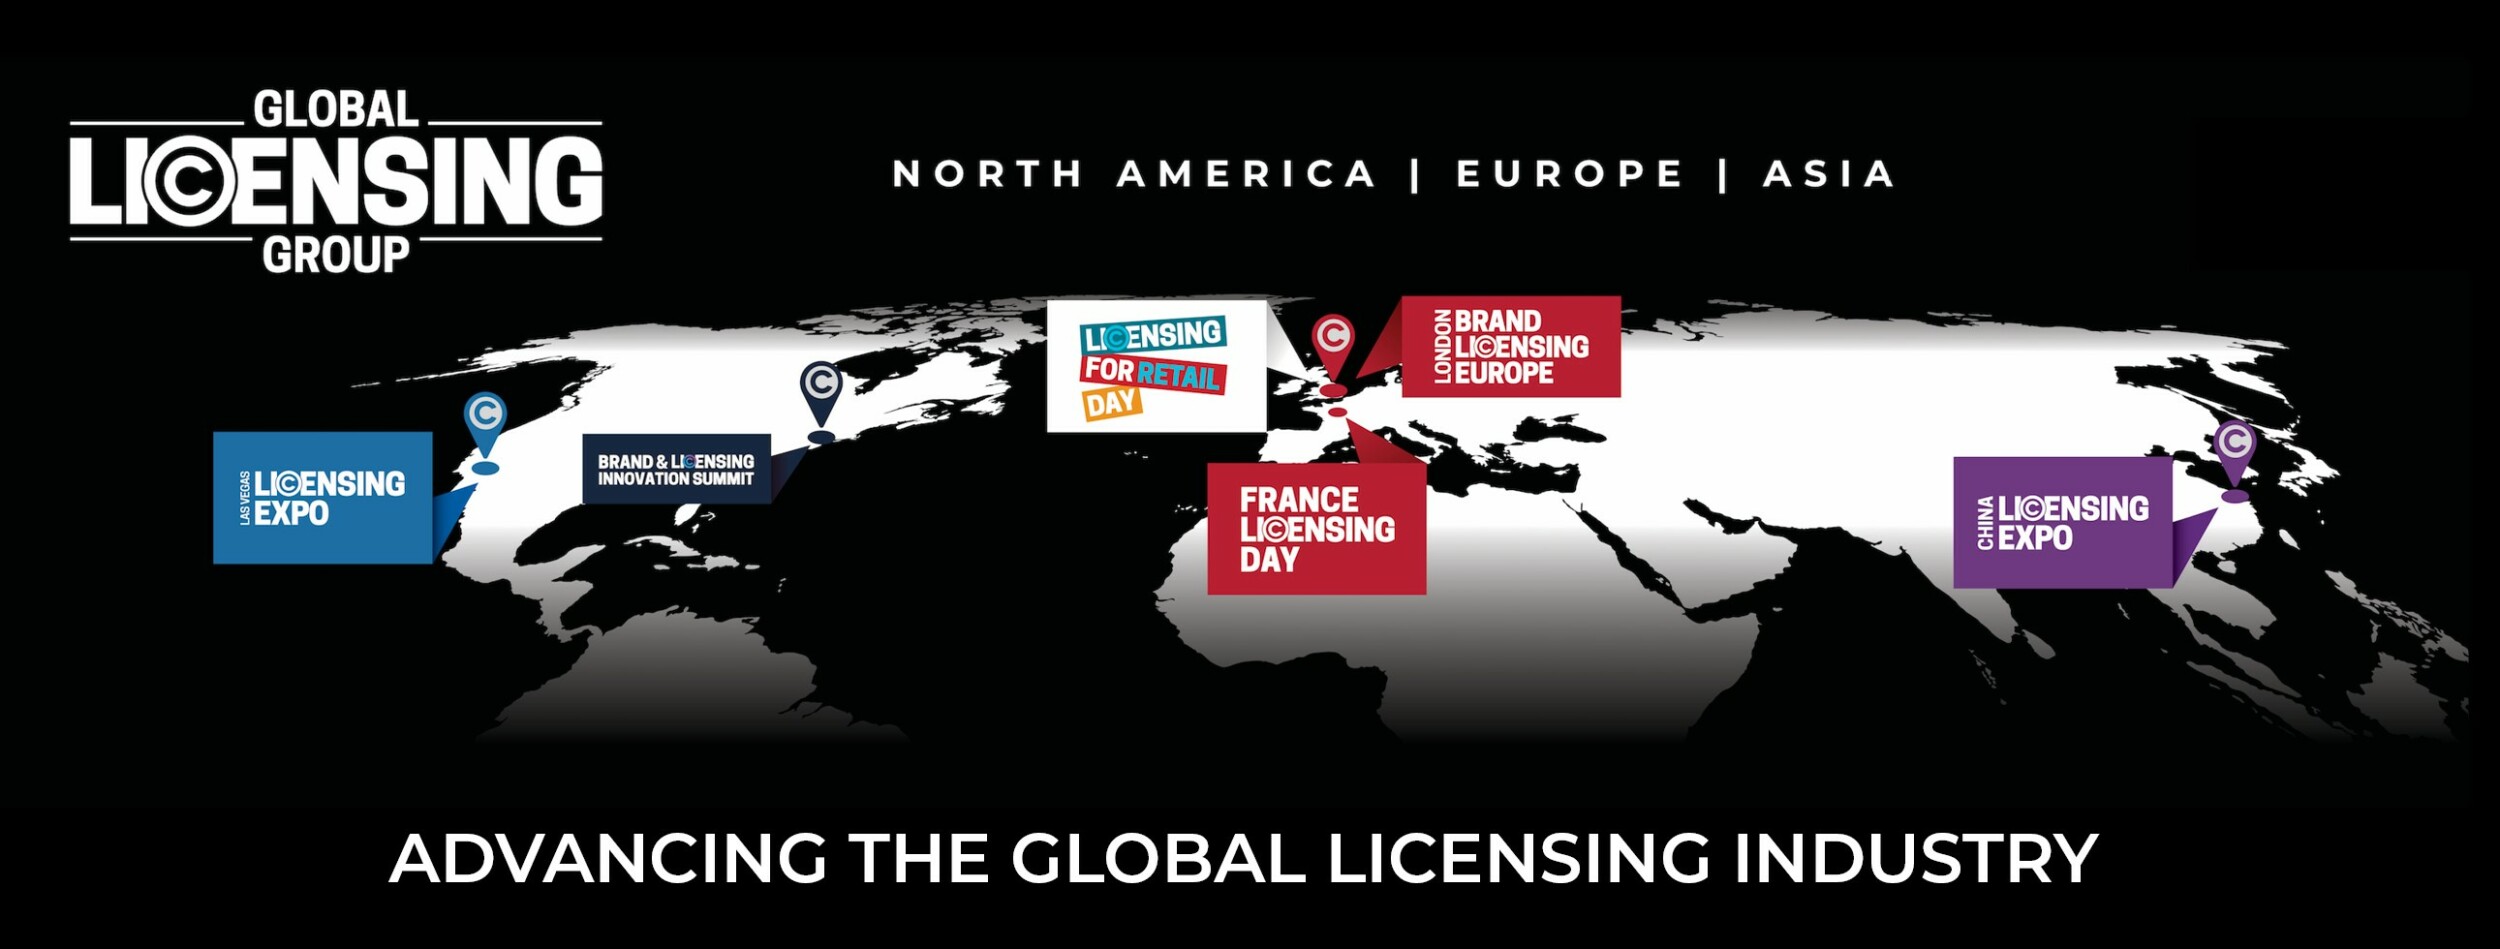 Future dates for Licensing Expo, BLE and more confirmed Toy World